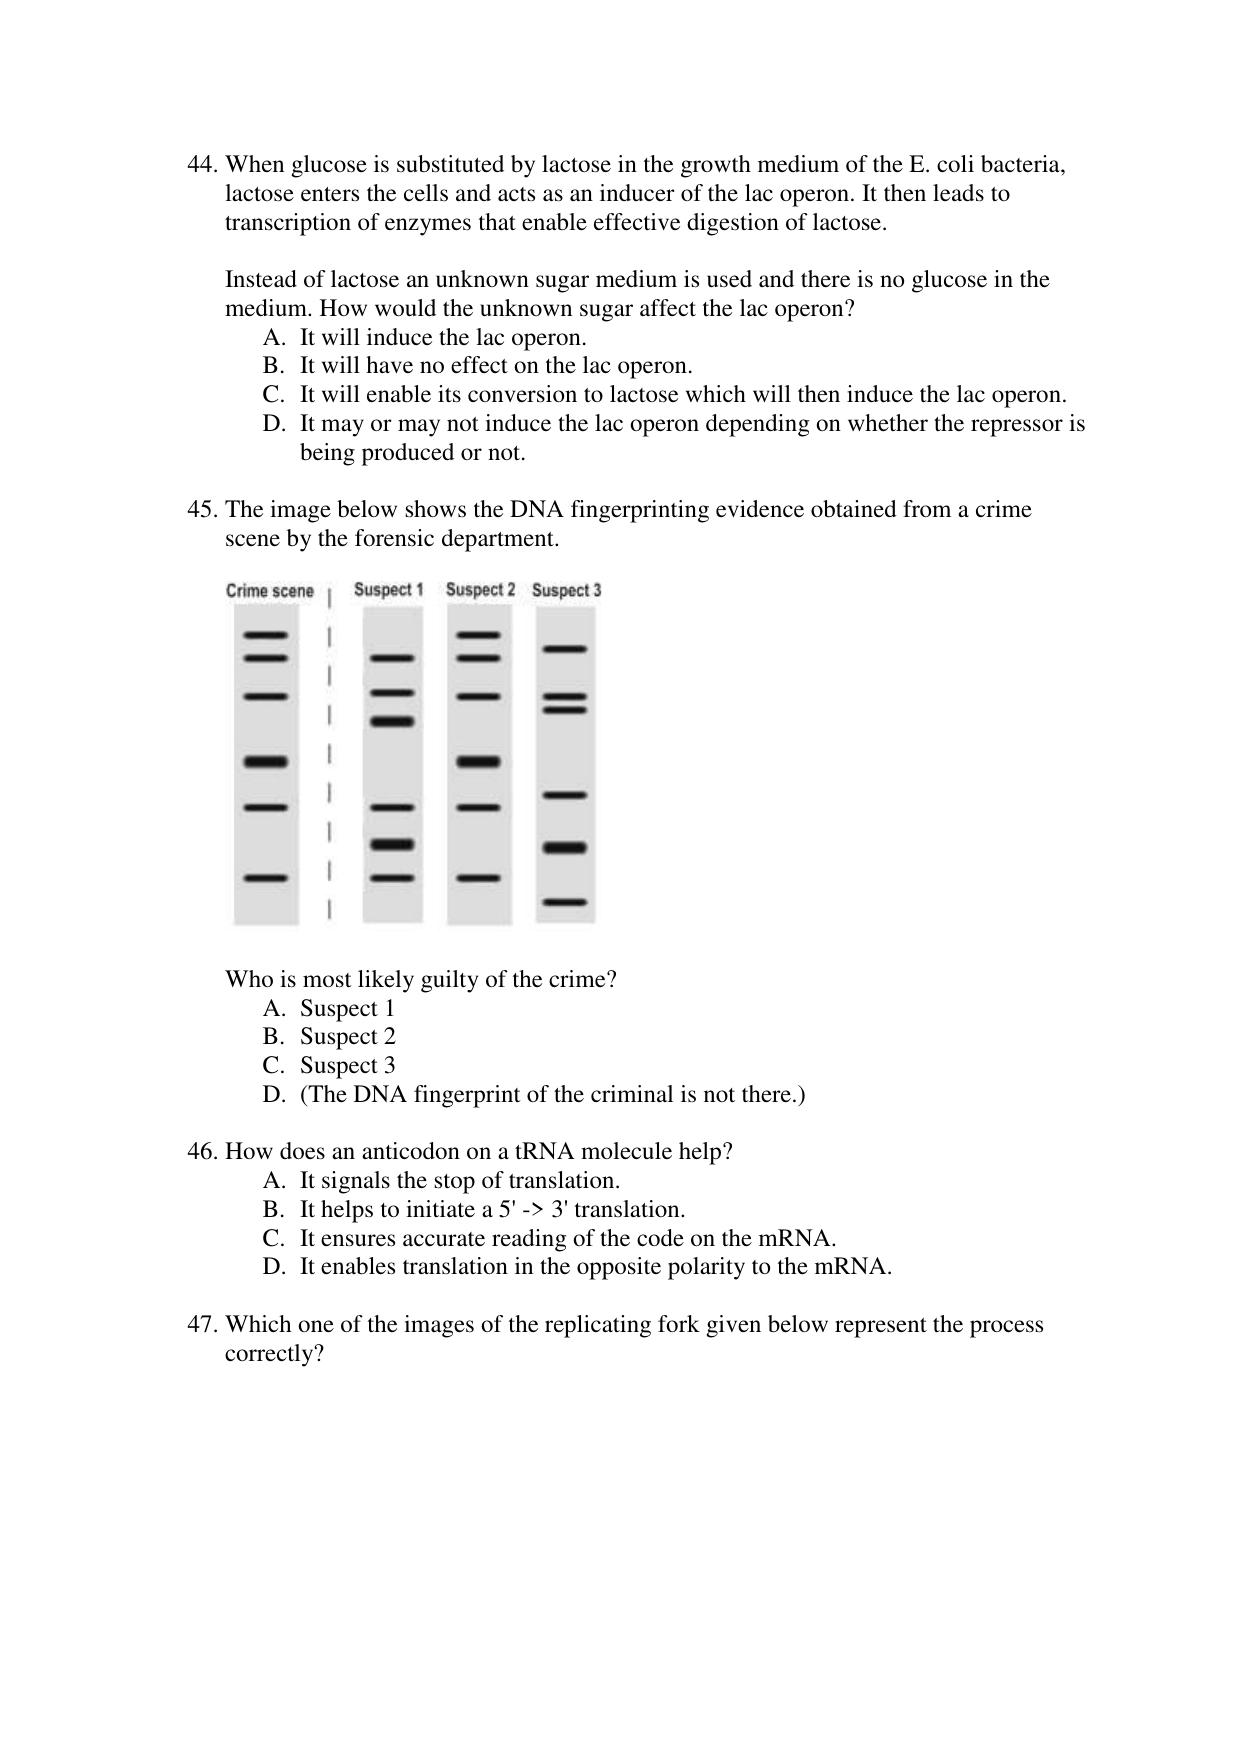 CBSE Class 12 Biology Term 1 Practice Questions 2021-22 - Page 14